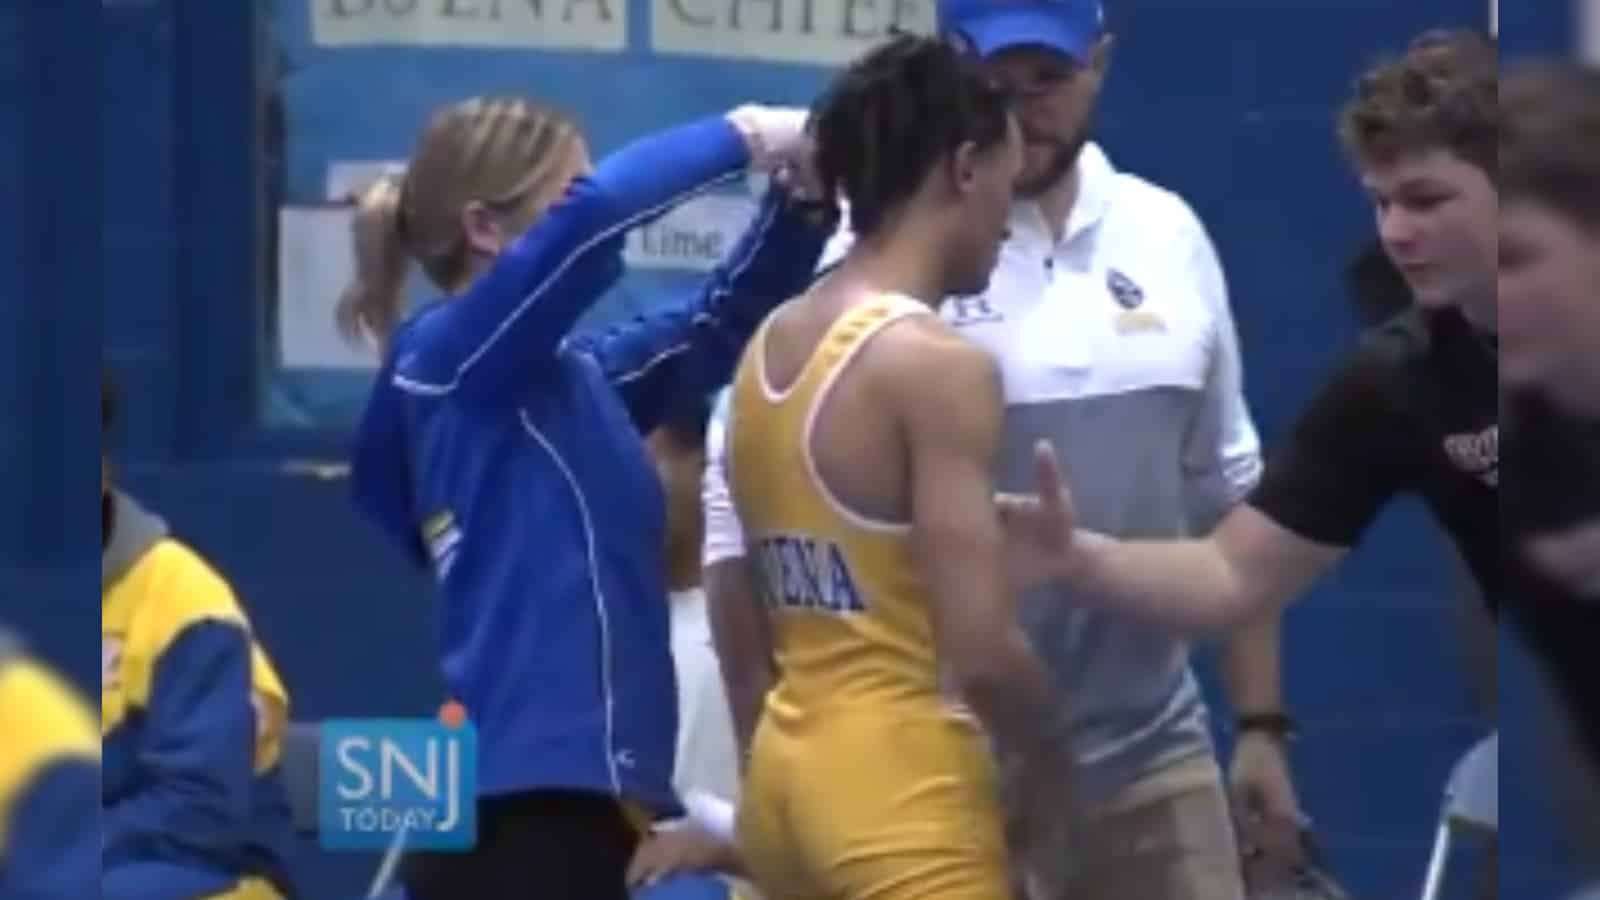 image for White Referee Fired After Forcing Black Wrestler to Cut Dreadlocks